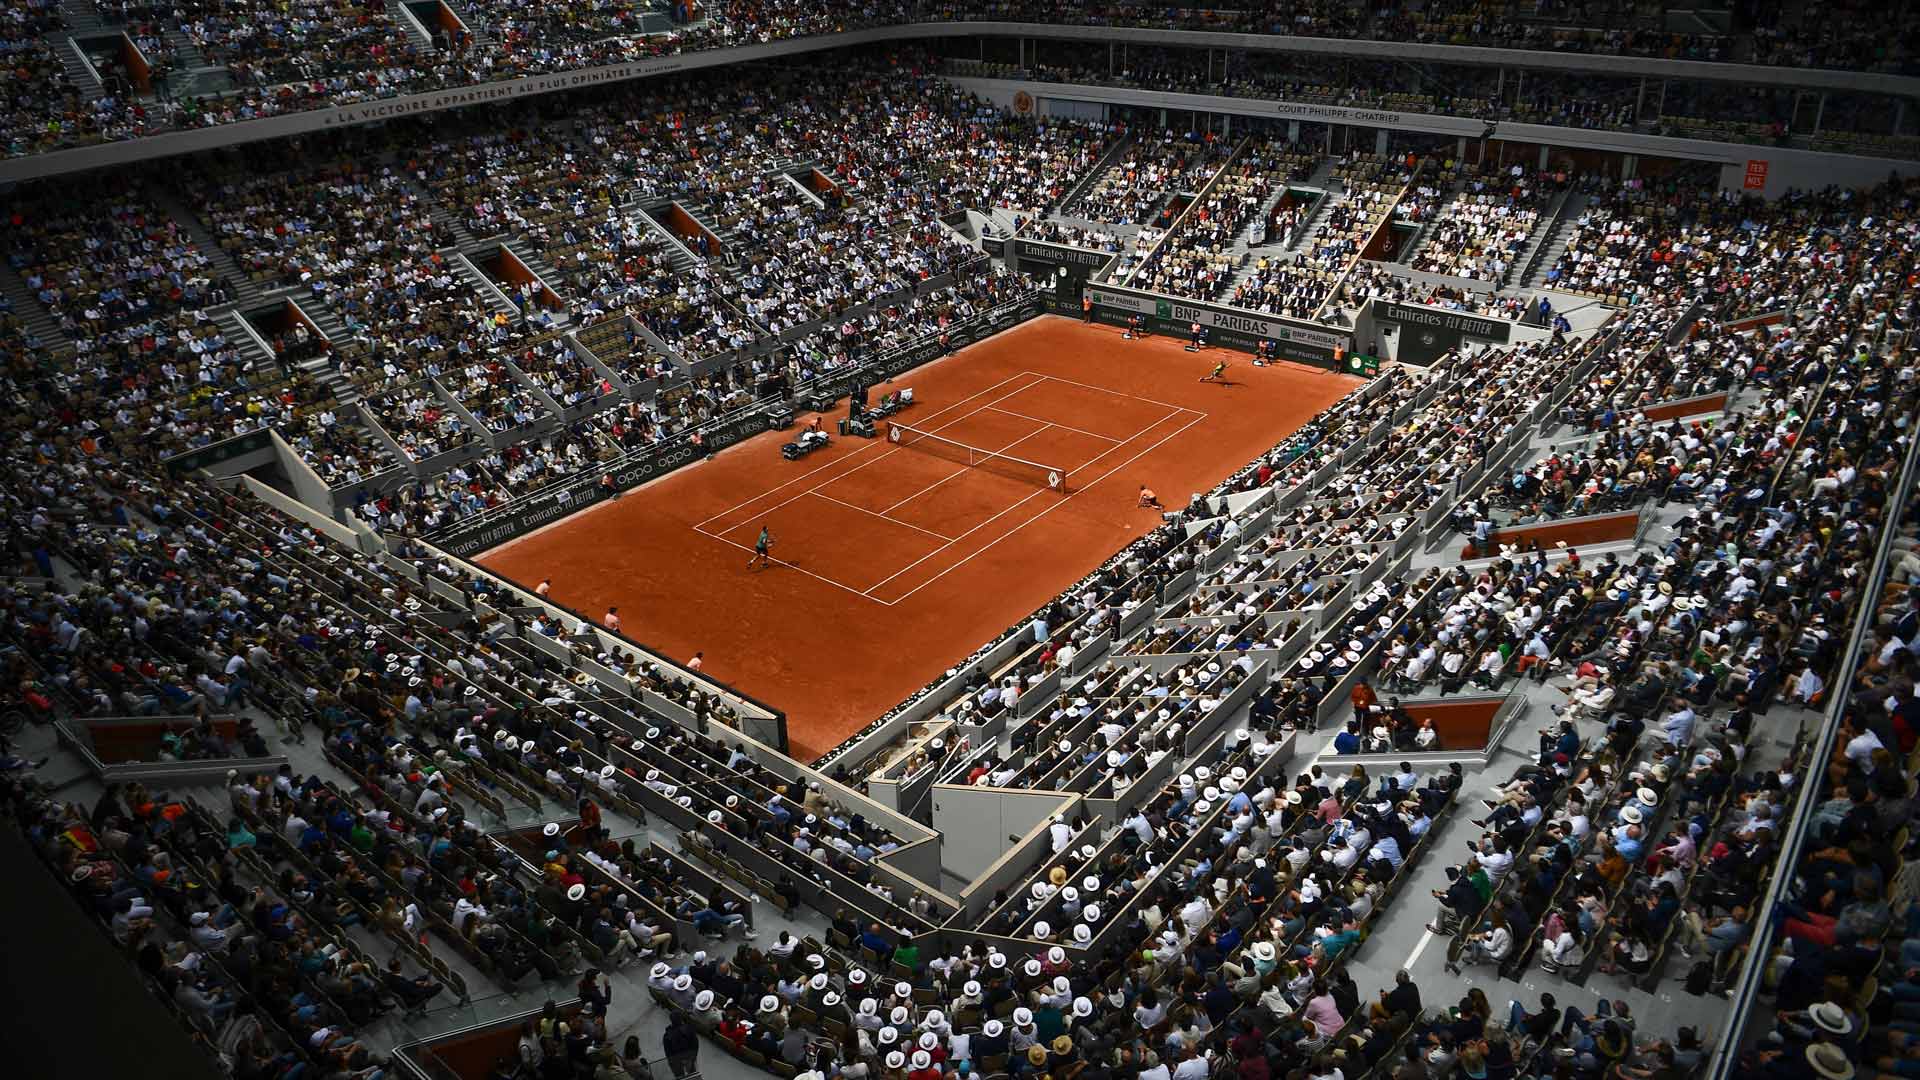 Roland Garros will be played from 28 May-11 June this year.